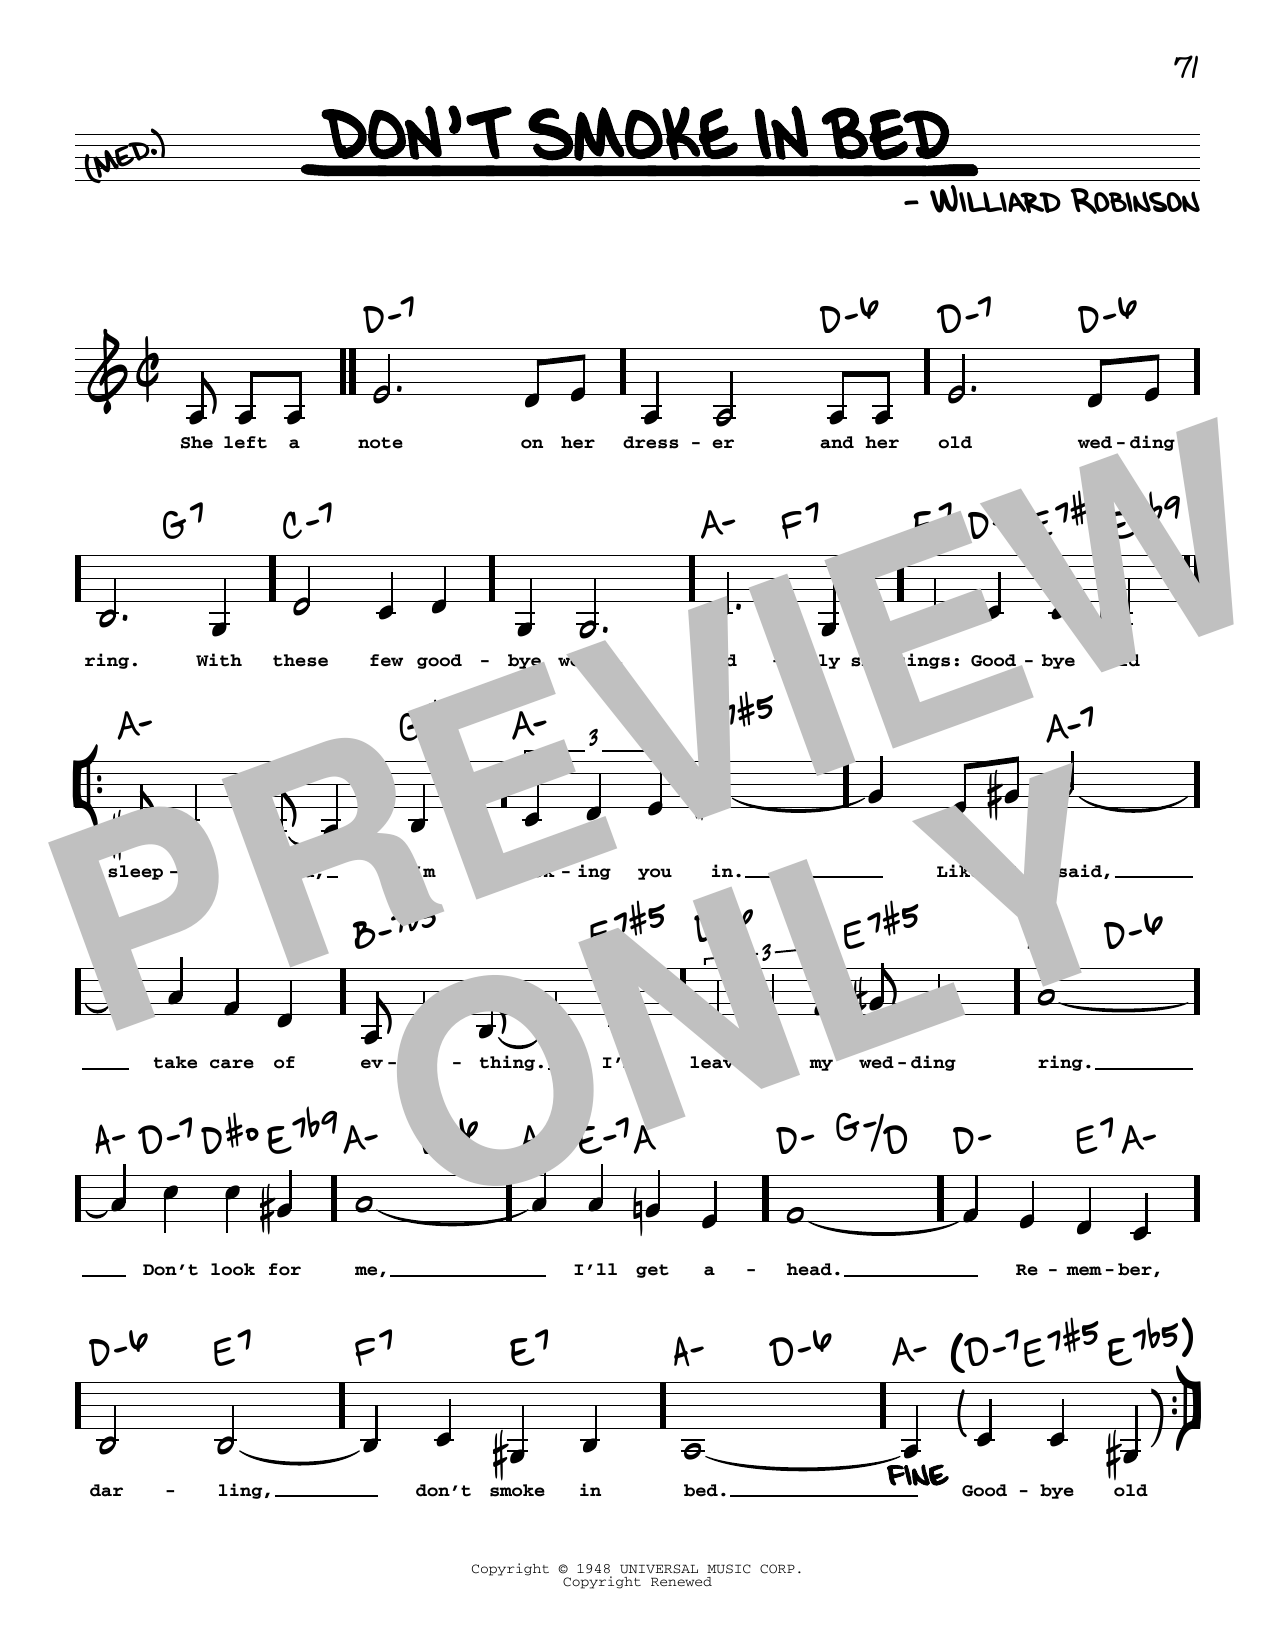 Williard Robinson Don't Smoke In Bed (Low Voice) sheet music notes printable PDF score